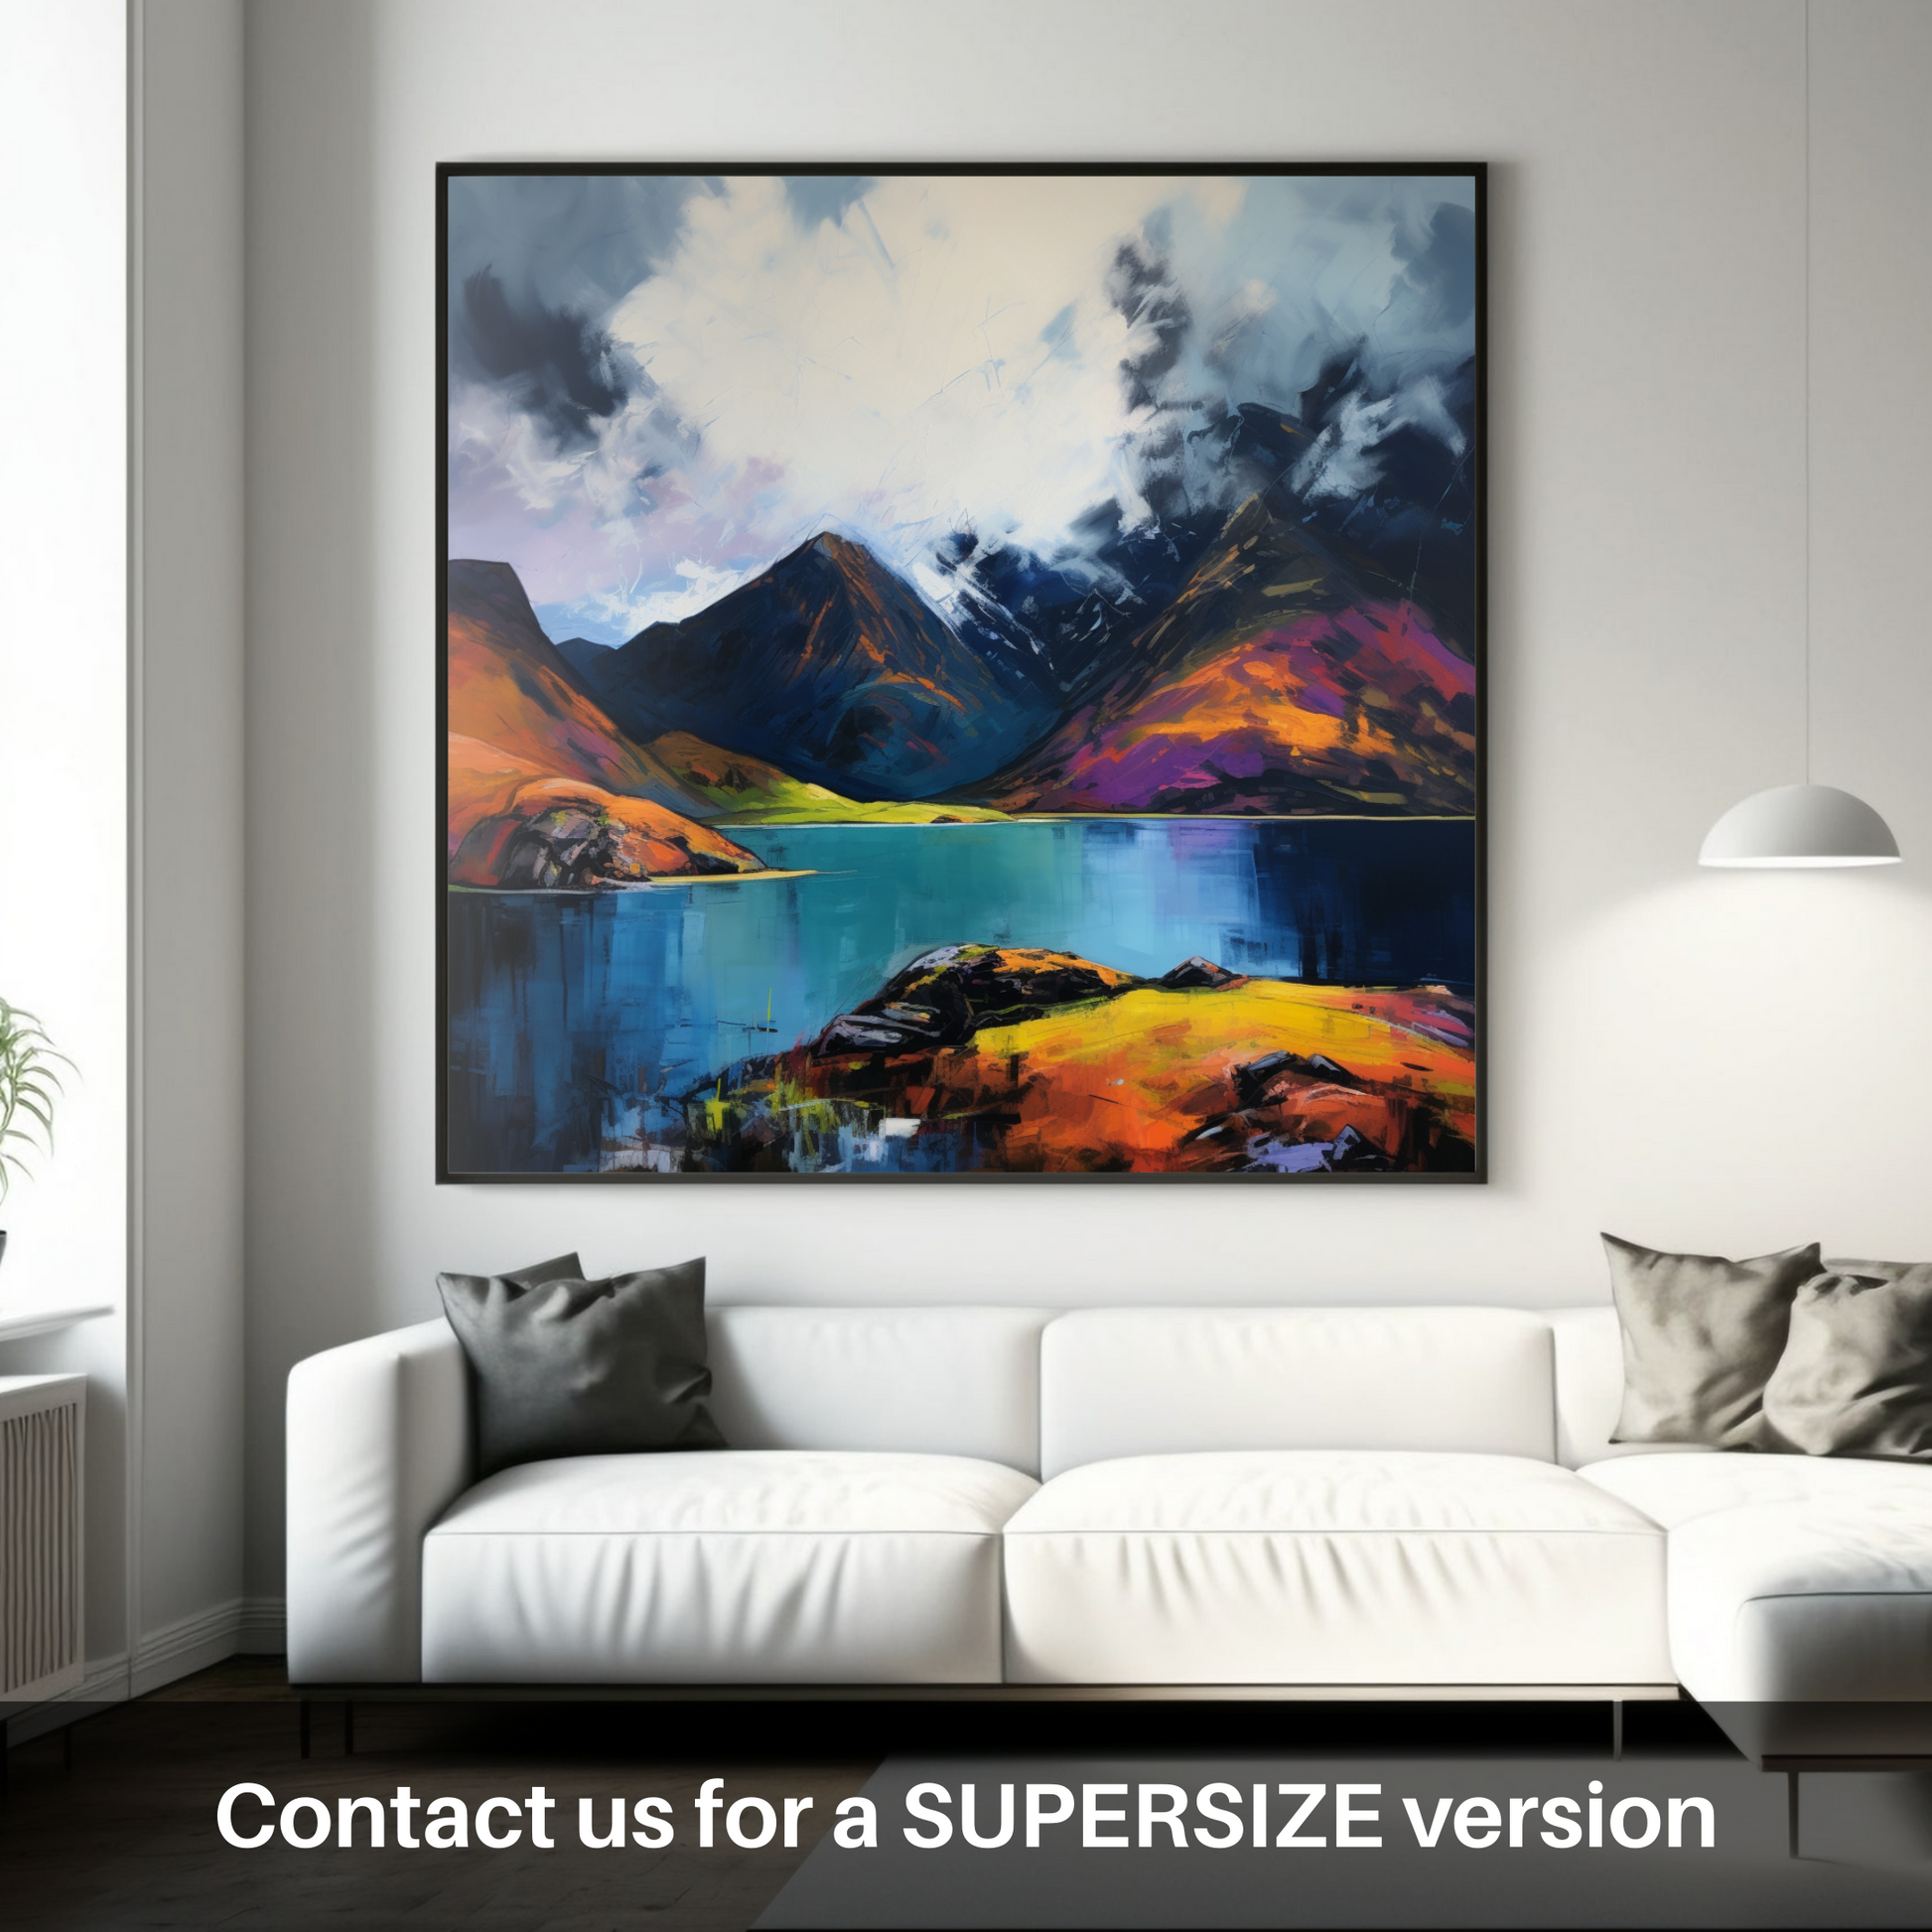 Huge supersize print of Loch Coruisk with a stormy sky